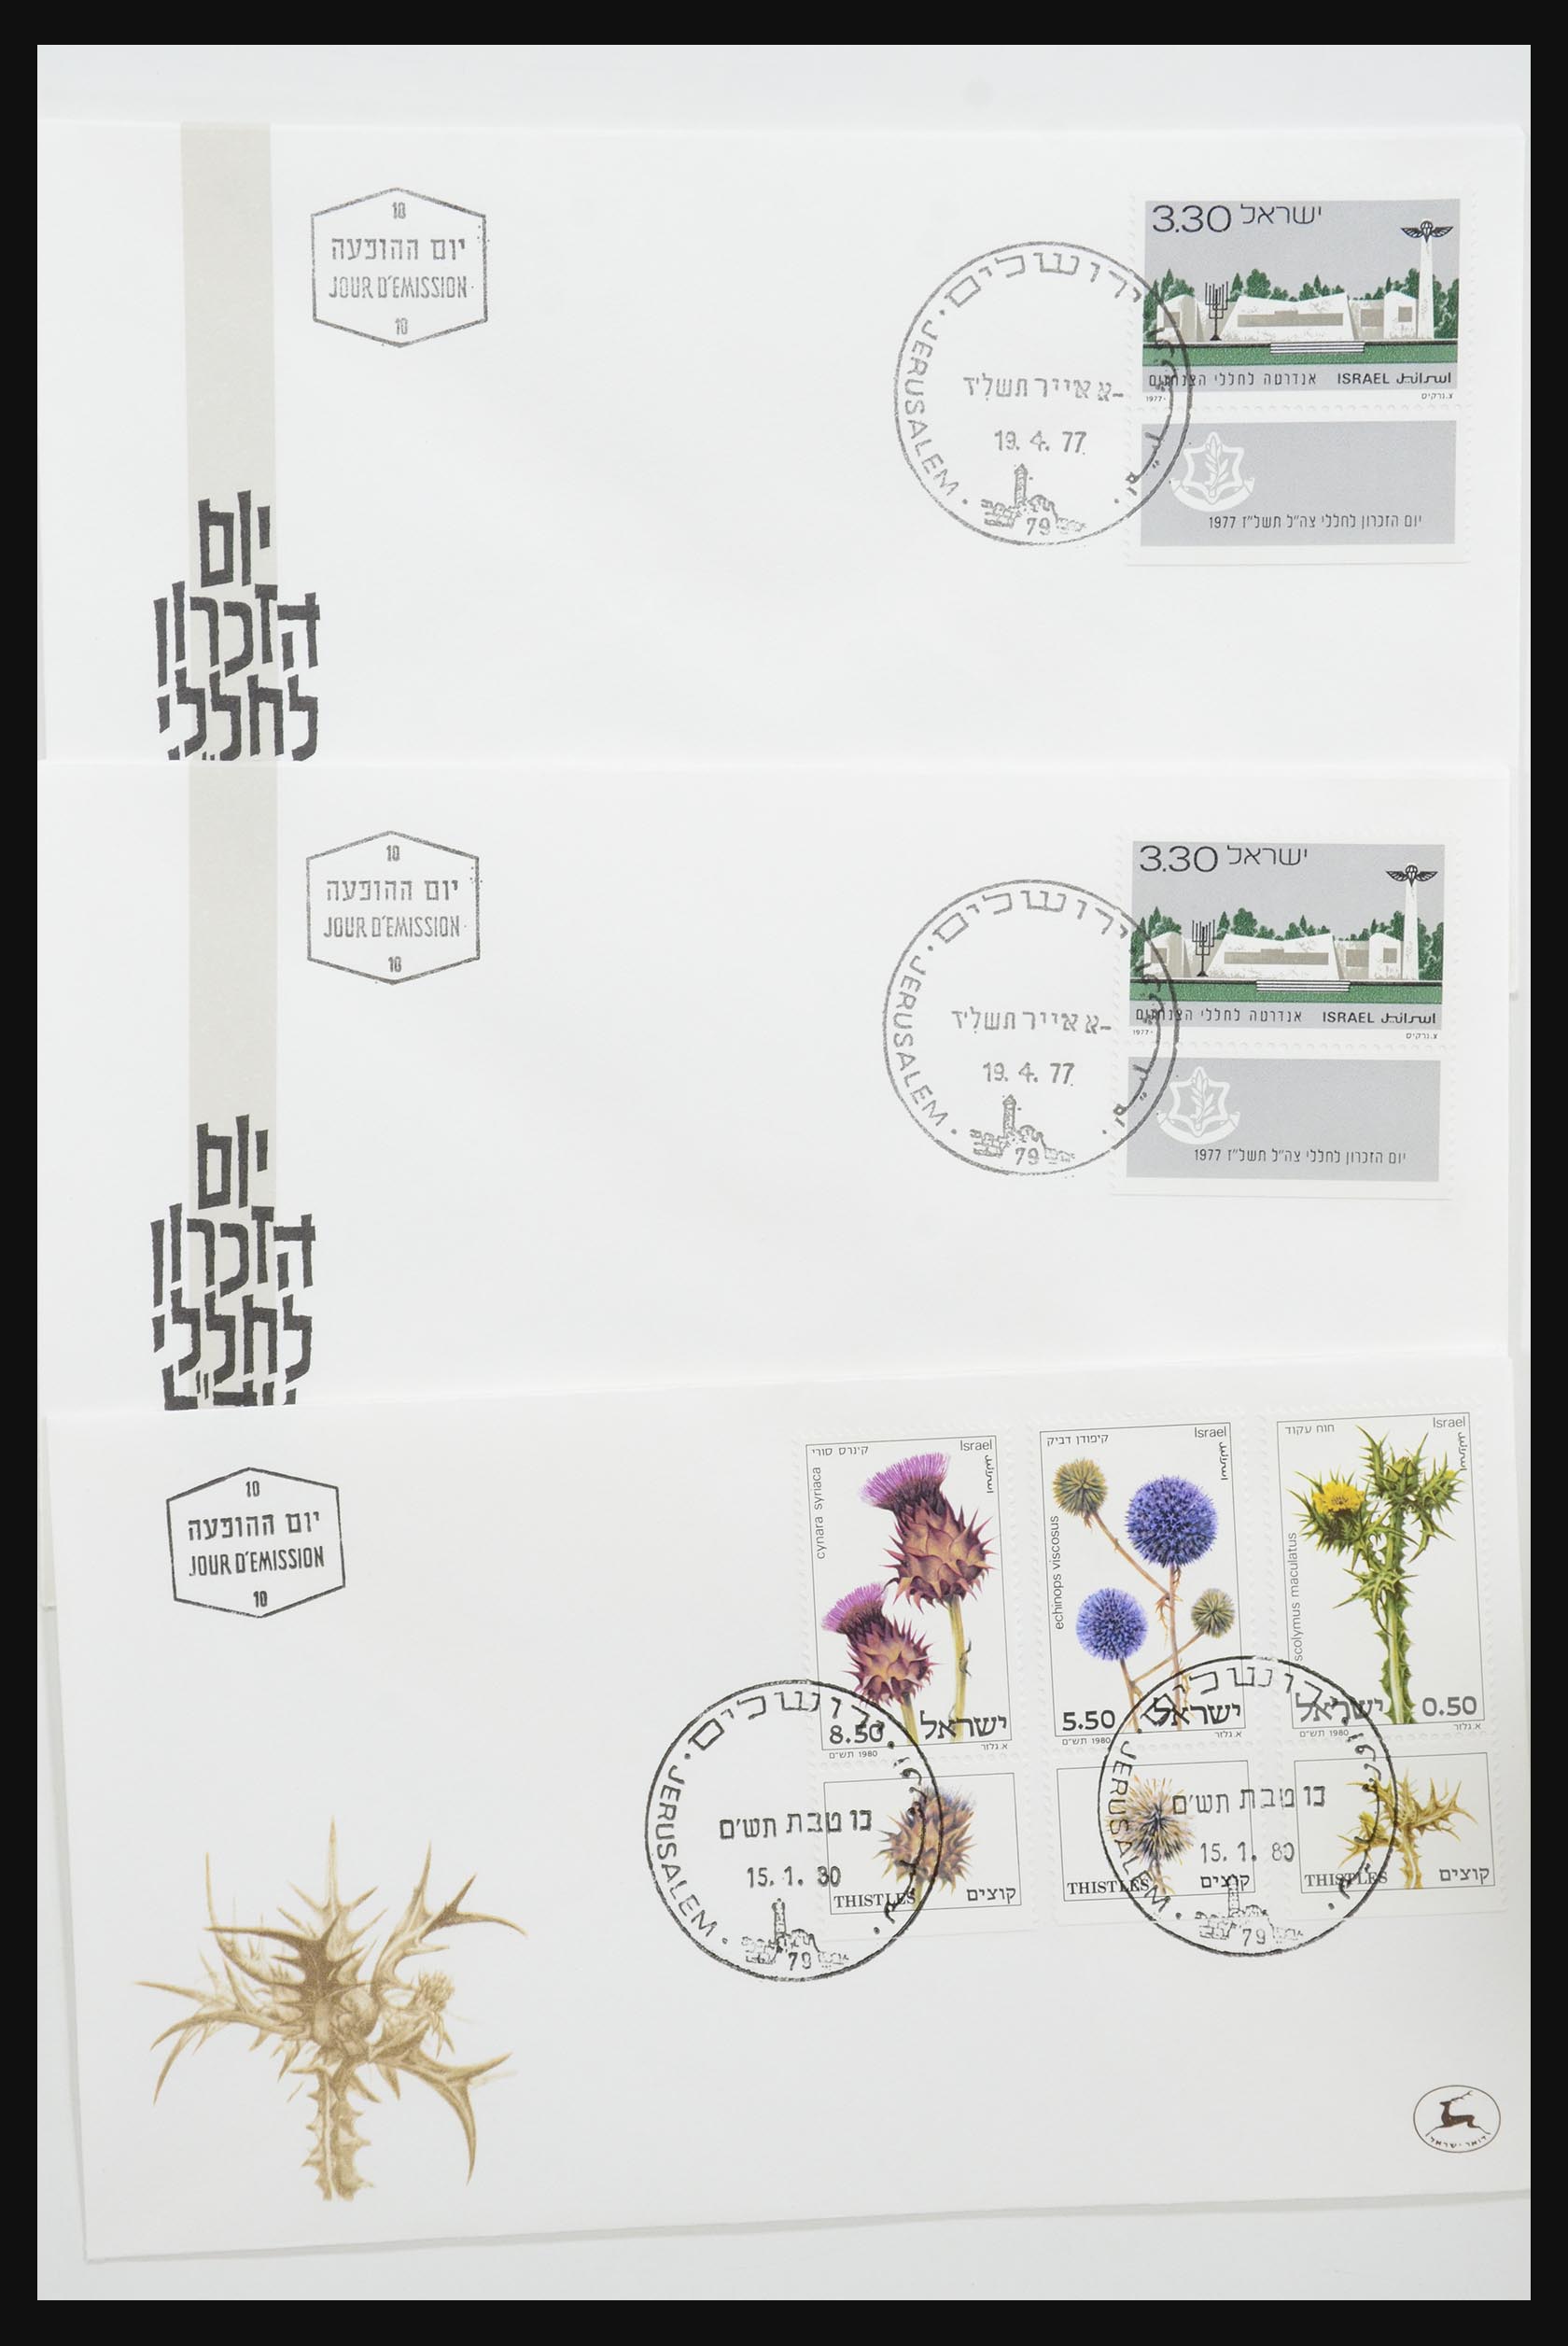 31924 011 - 31924 Israel first day cover collection 1957-2003.